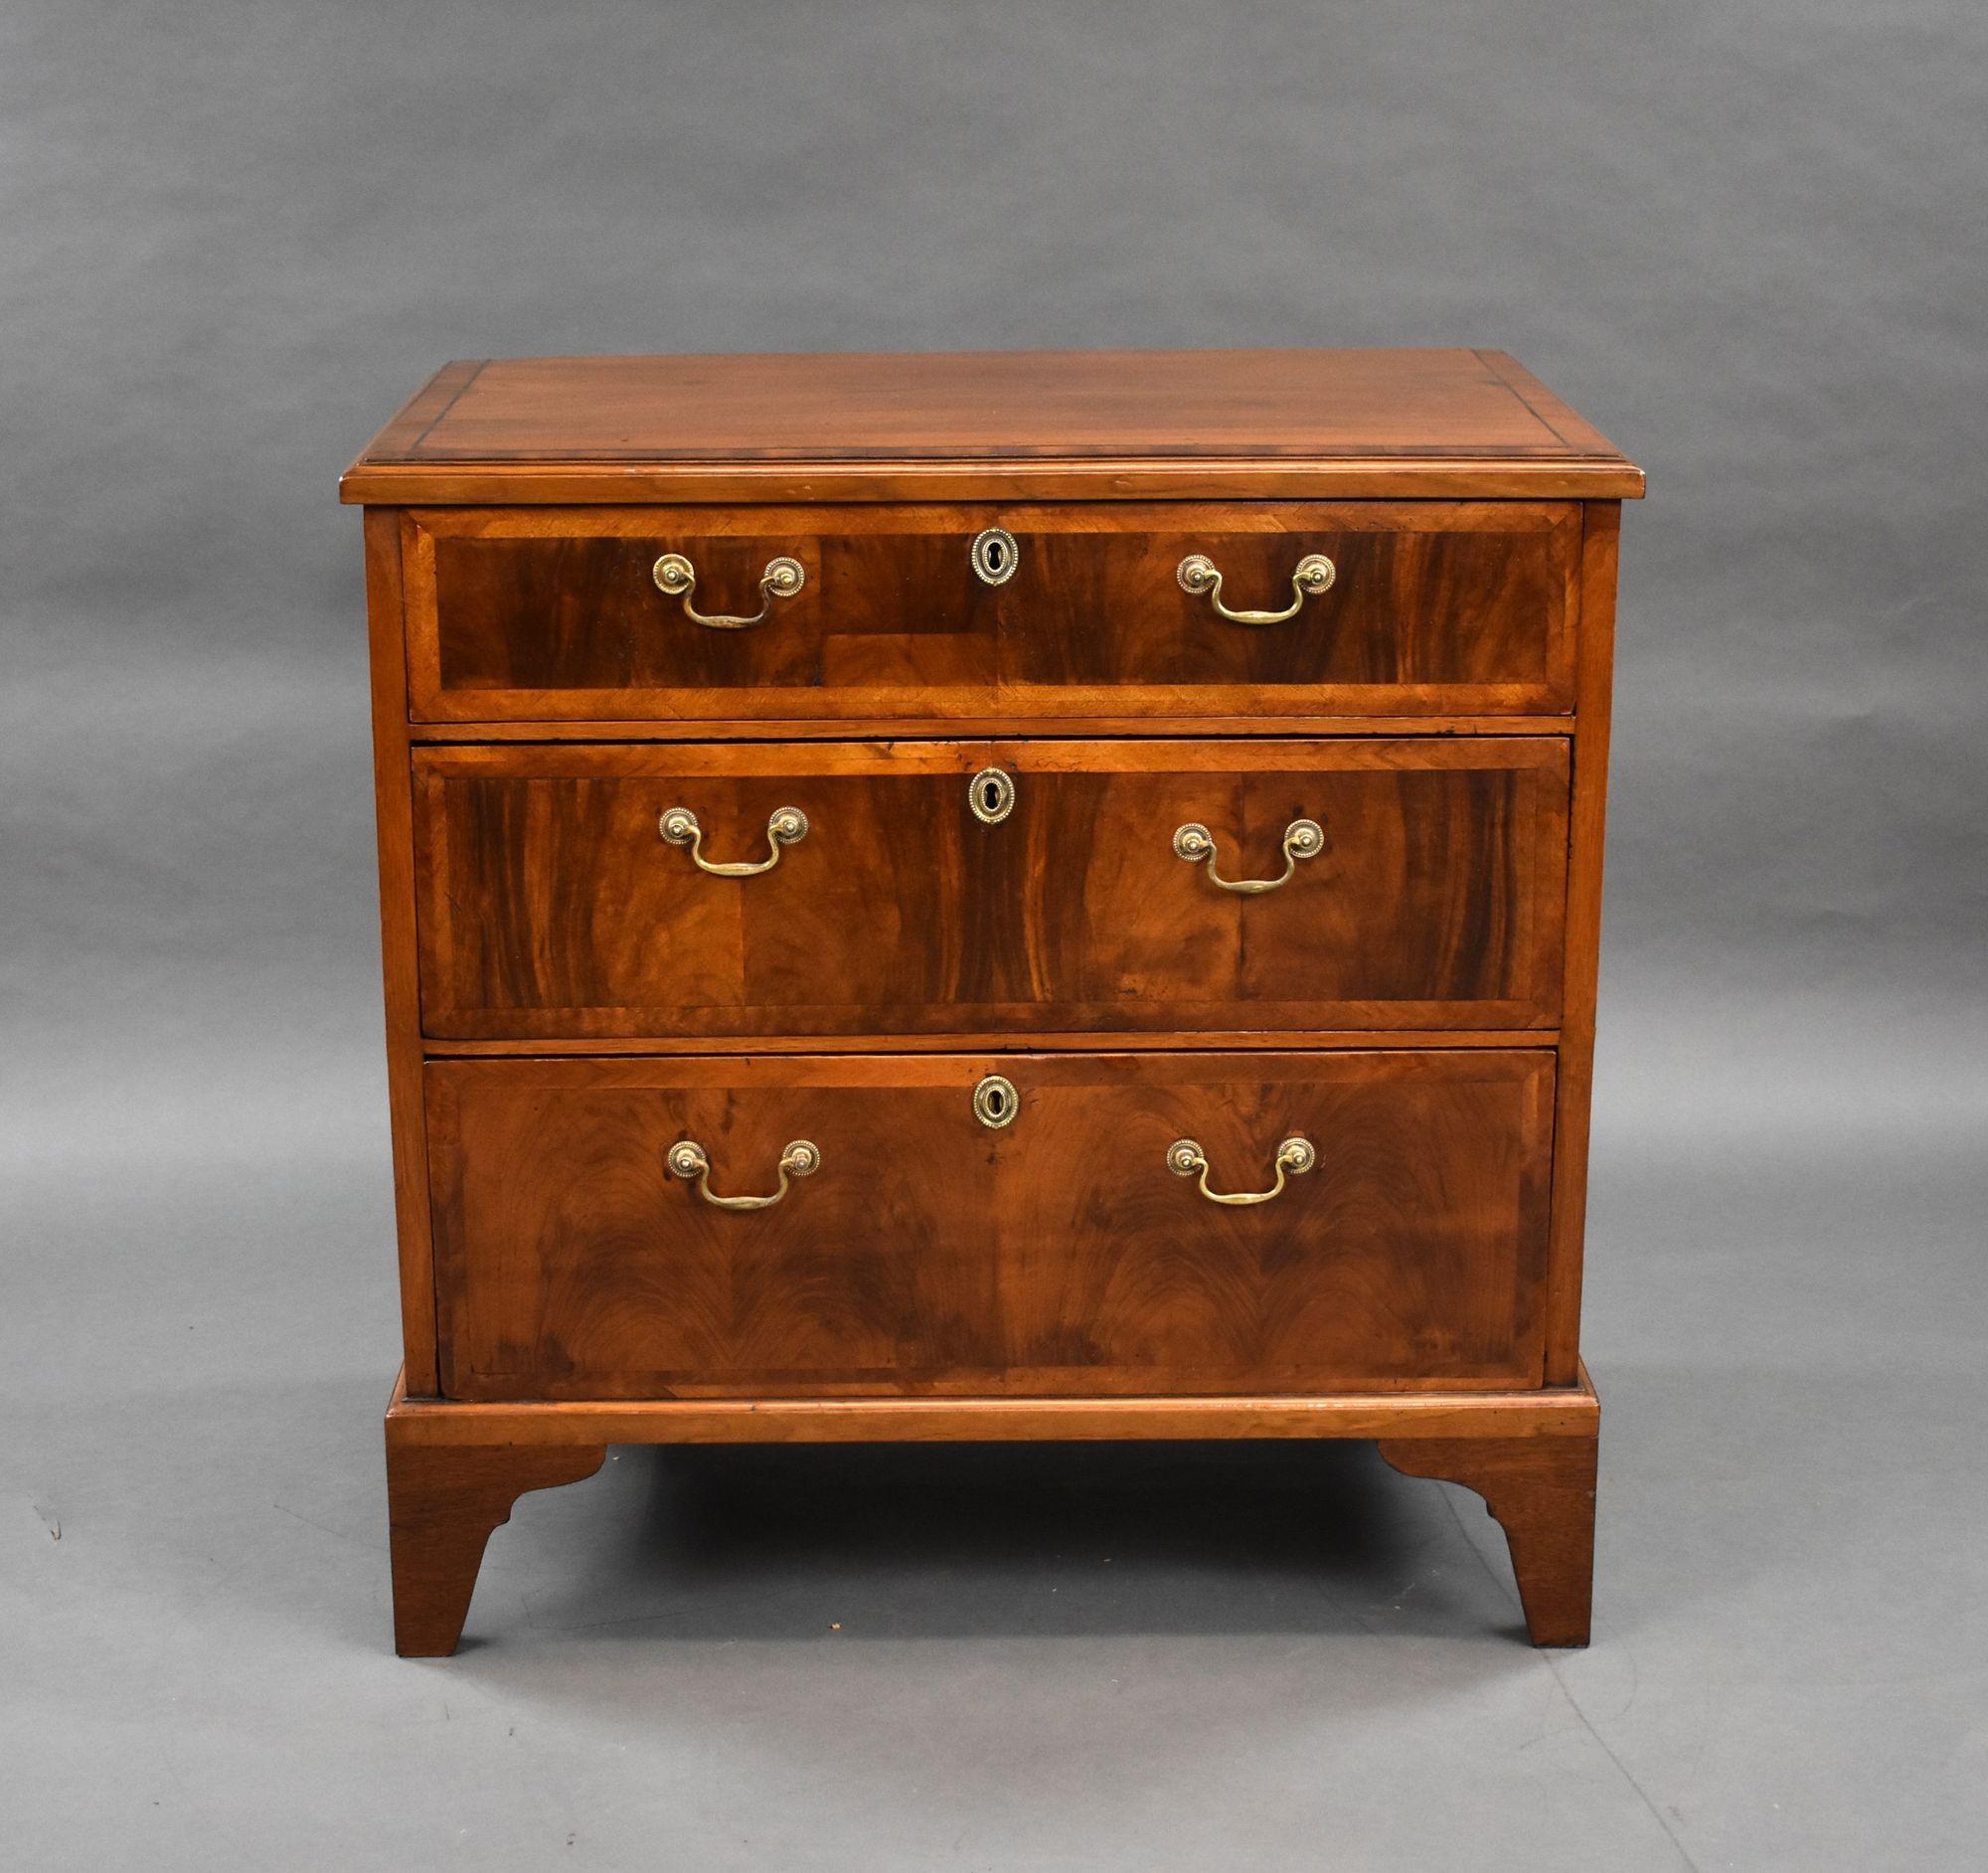 For sale is a good quality George III figured walnut chest of drawers, having a banded and inlaid top, as well as banded sides, the chest has an arrangement of three graduated drawers, each with brass handles and herringbone inlays. The chest is